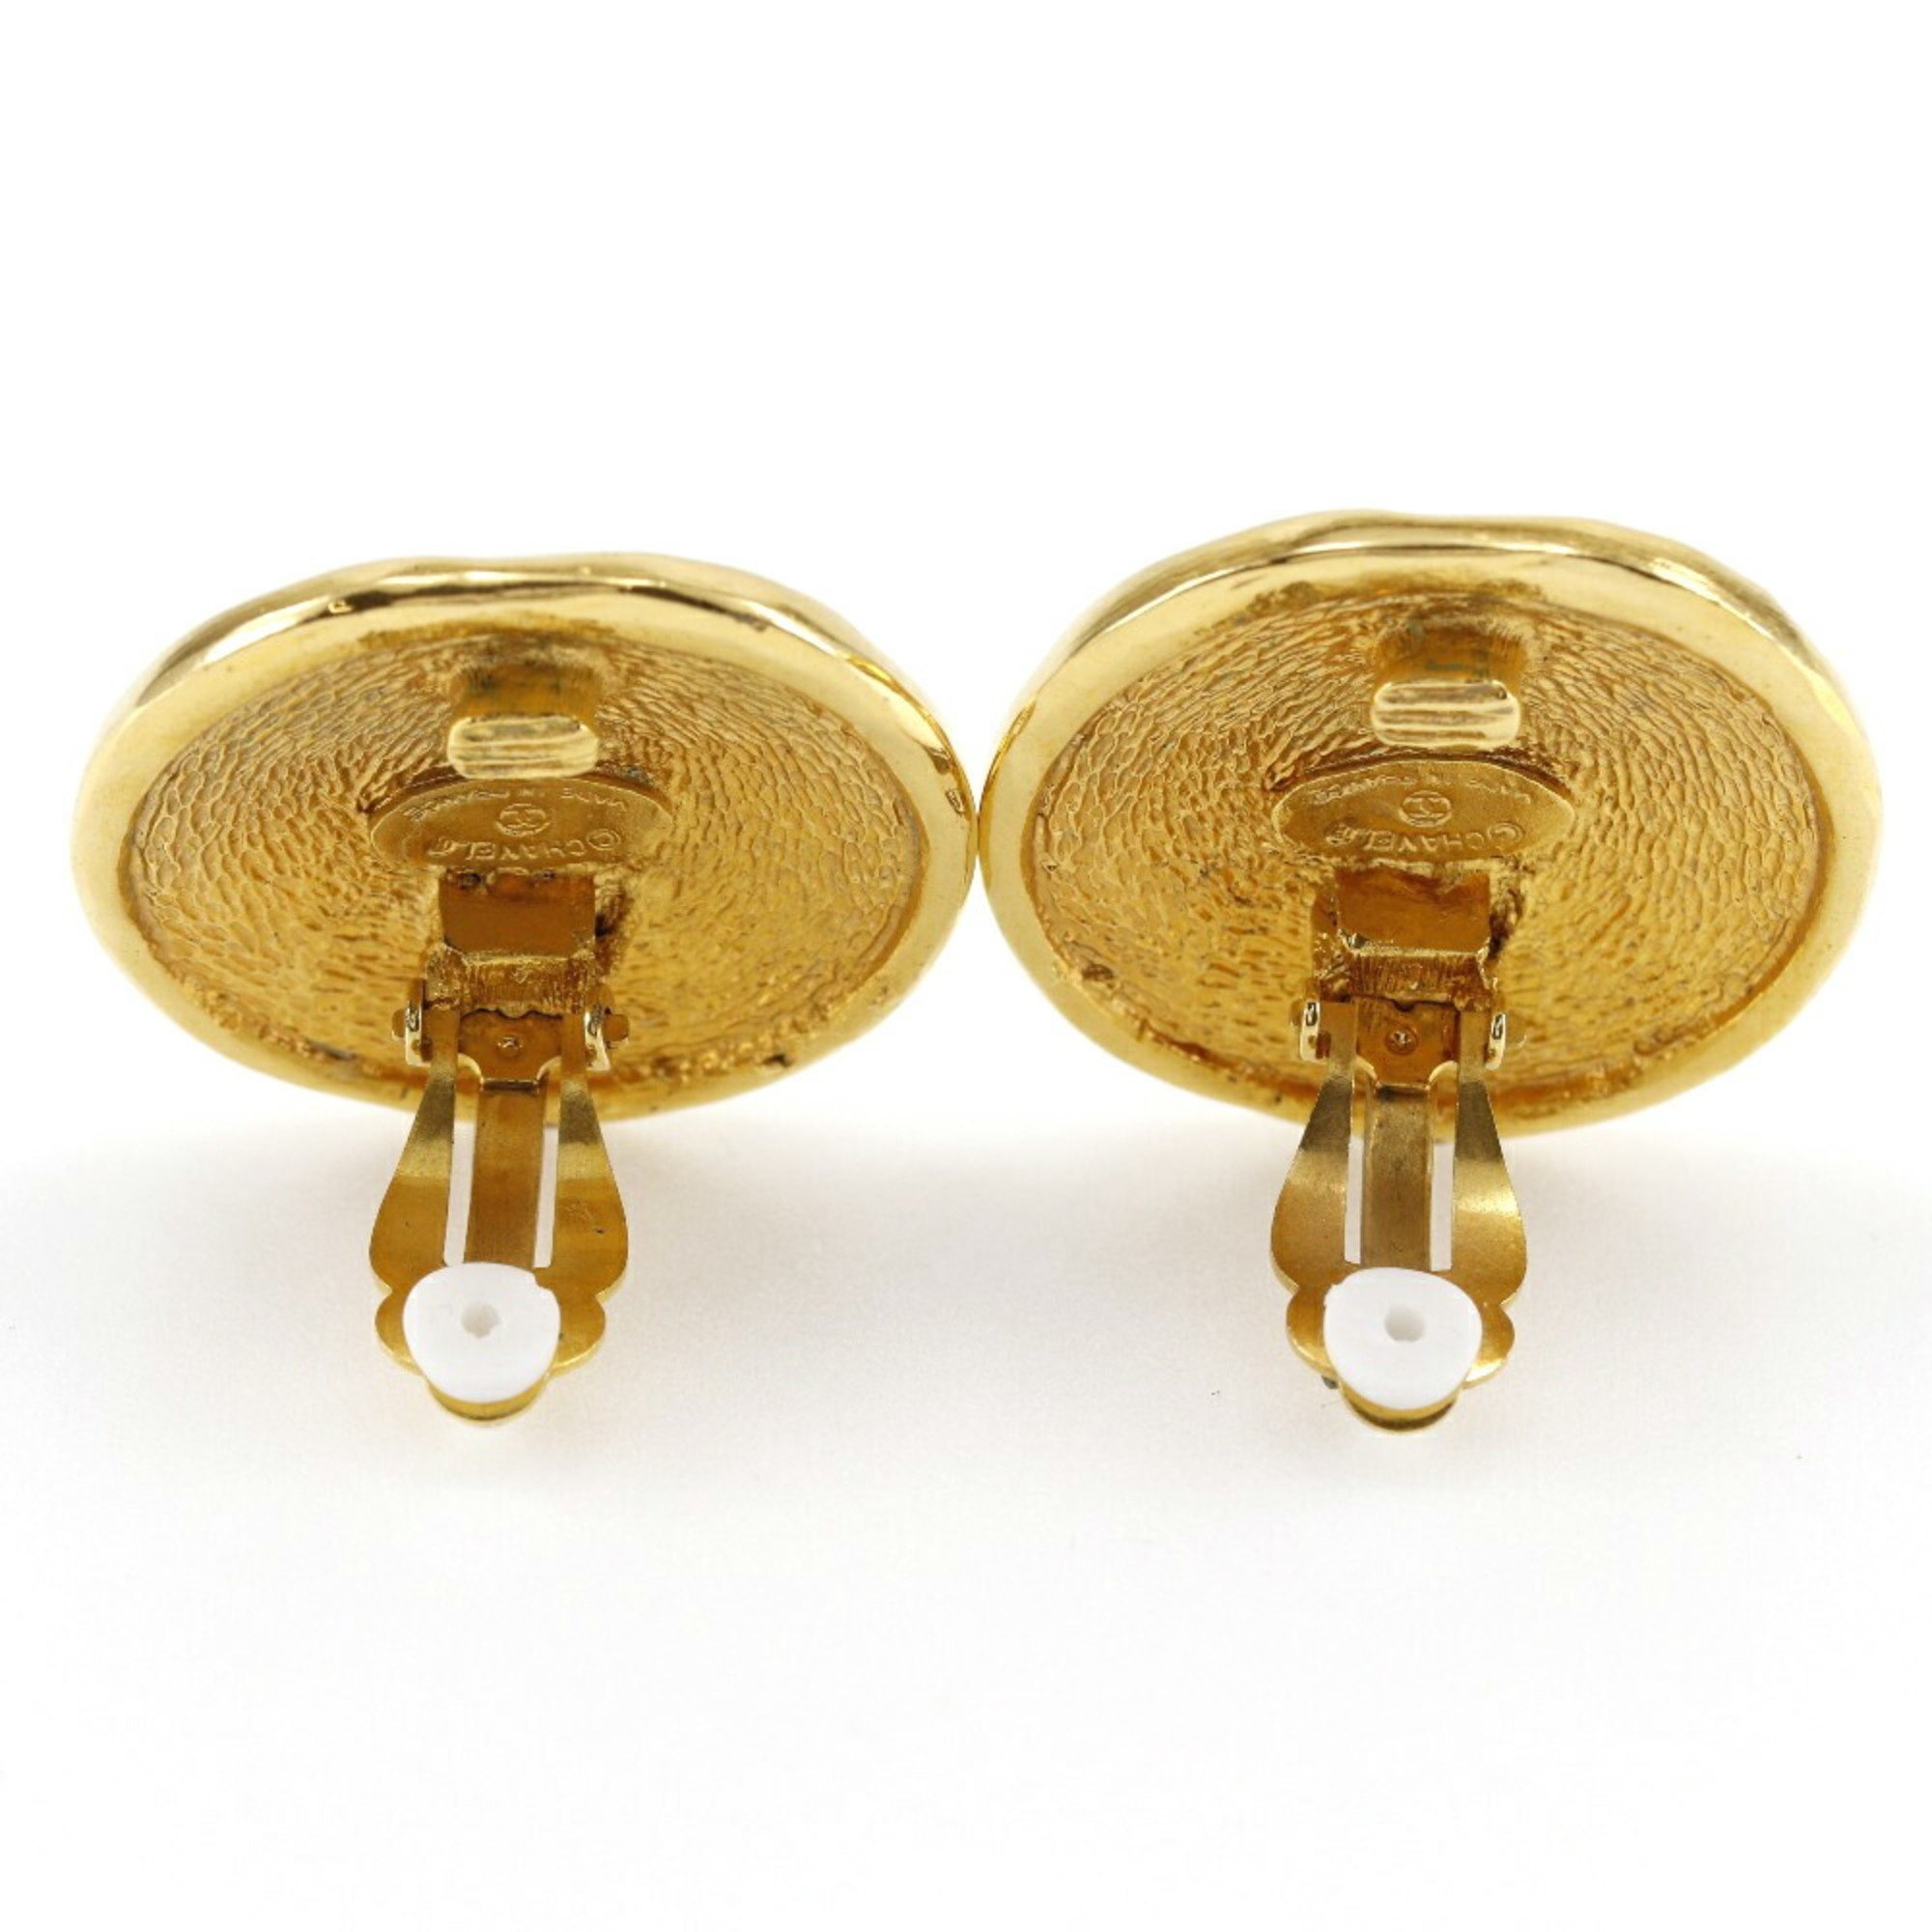 CHANEL 31 RUE CAMBON Earrings, Gold Plated, Approx. 26.4g, CAMBON, Women's, T142024966